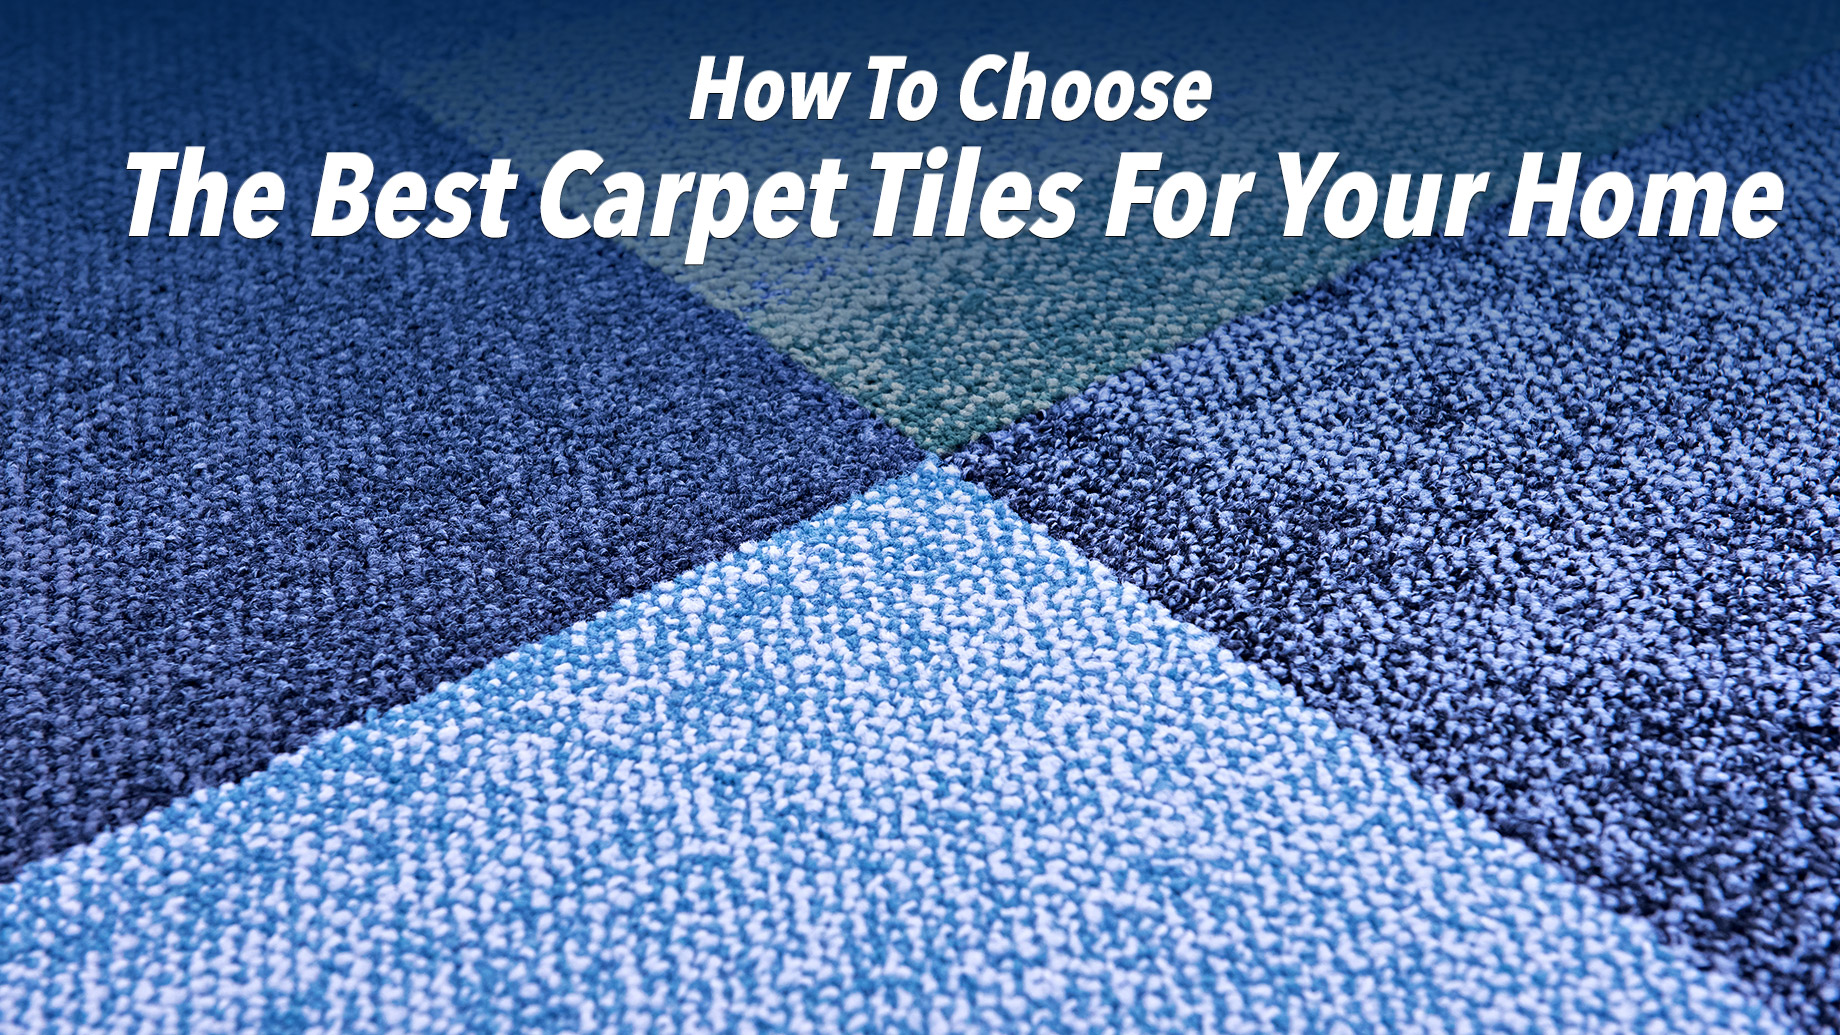 How To Choose The Best Carpet Tiles For Your Home